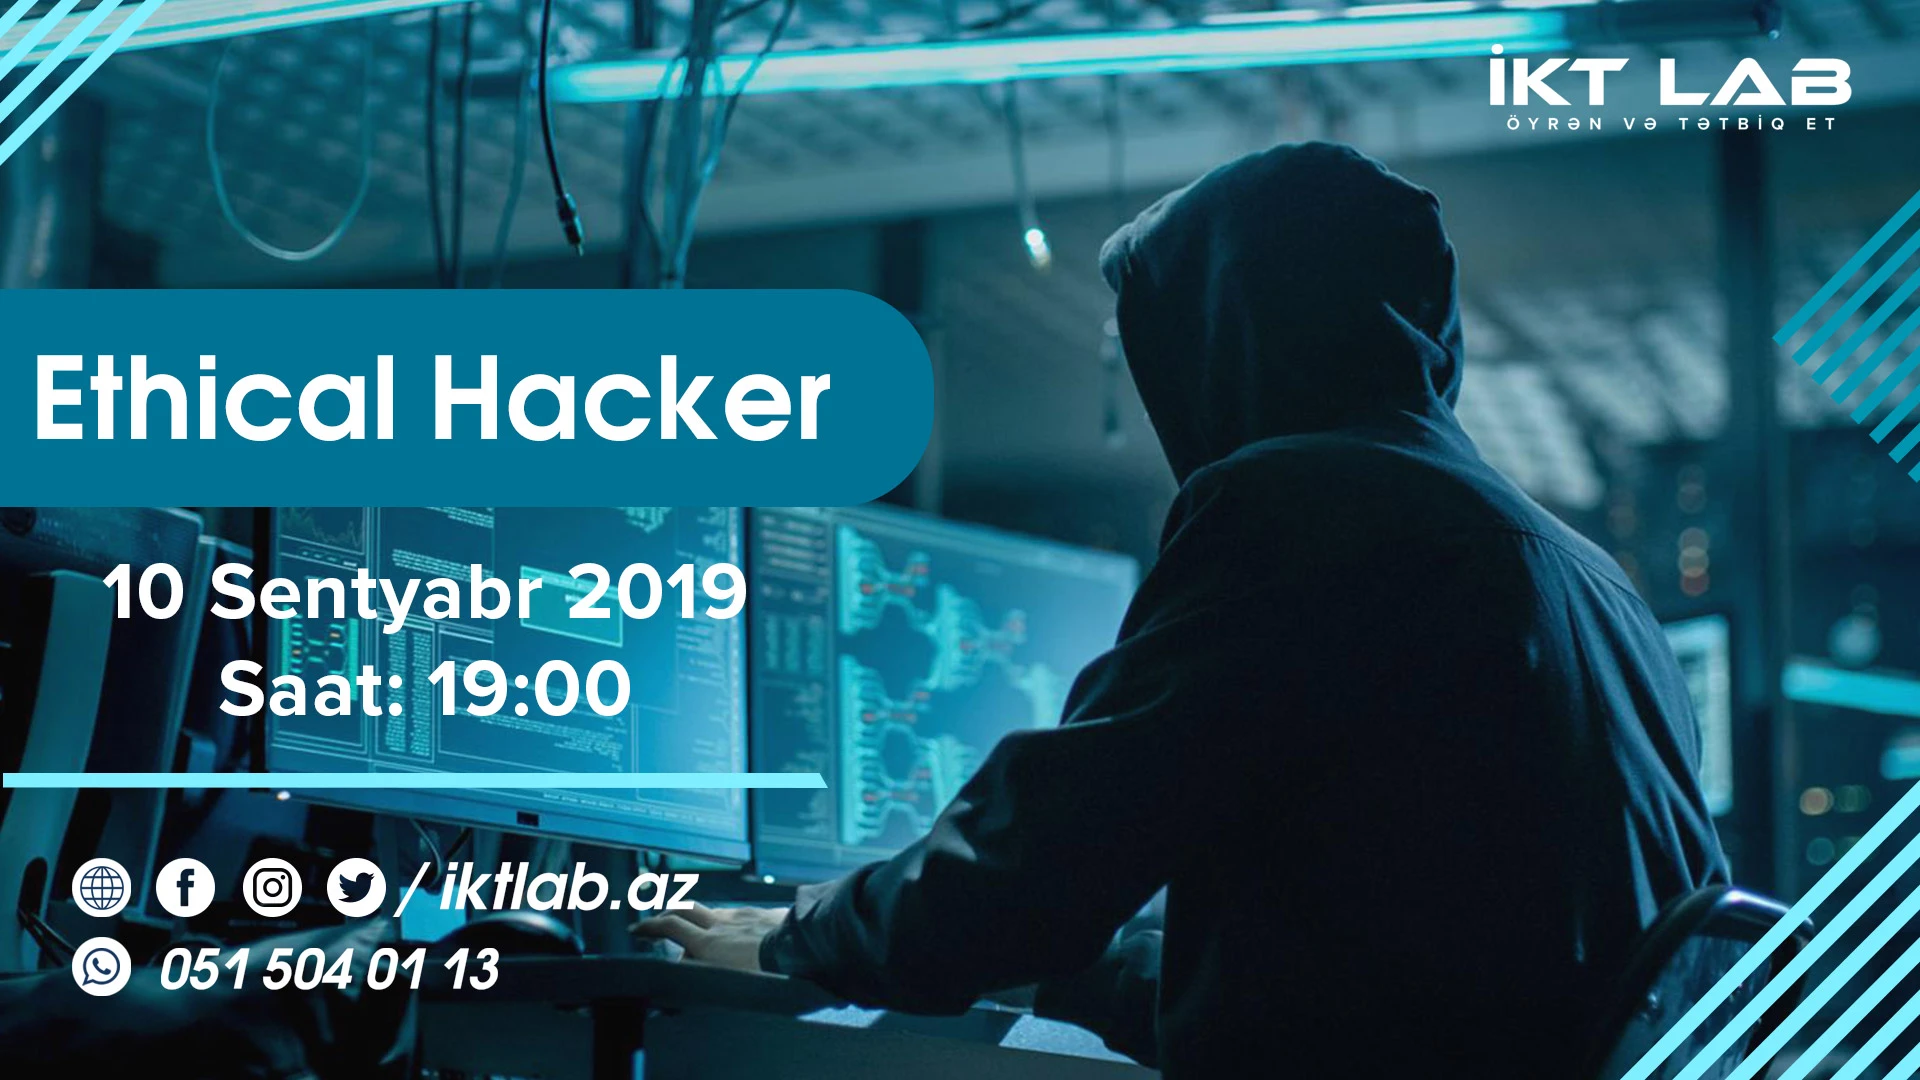 Ethical Hacker - Demo day